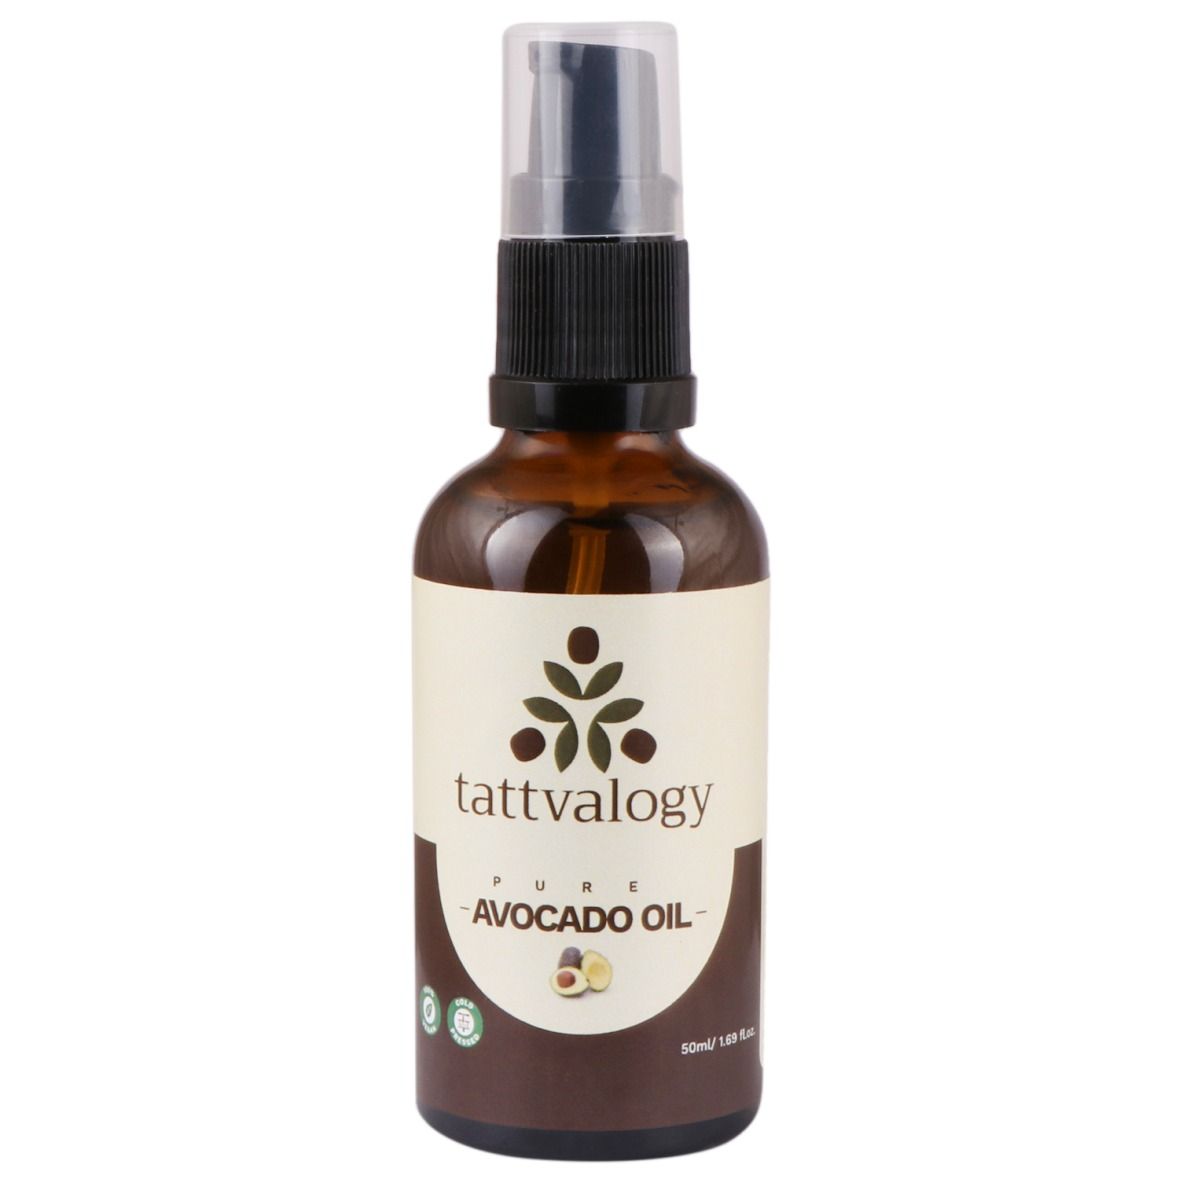 Tattvalogy Pure Avocado Oil, Cold Pressed Stress Relief Body Massage Oil, Jar Packaging